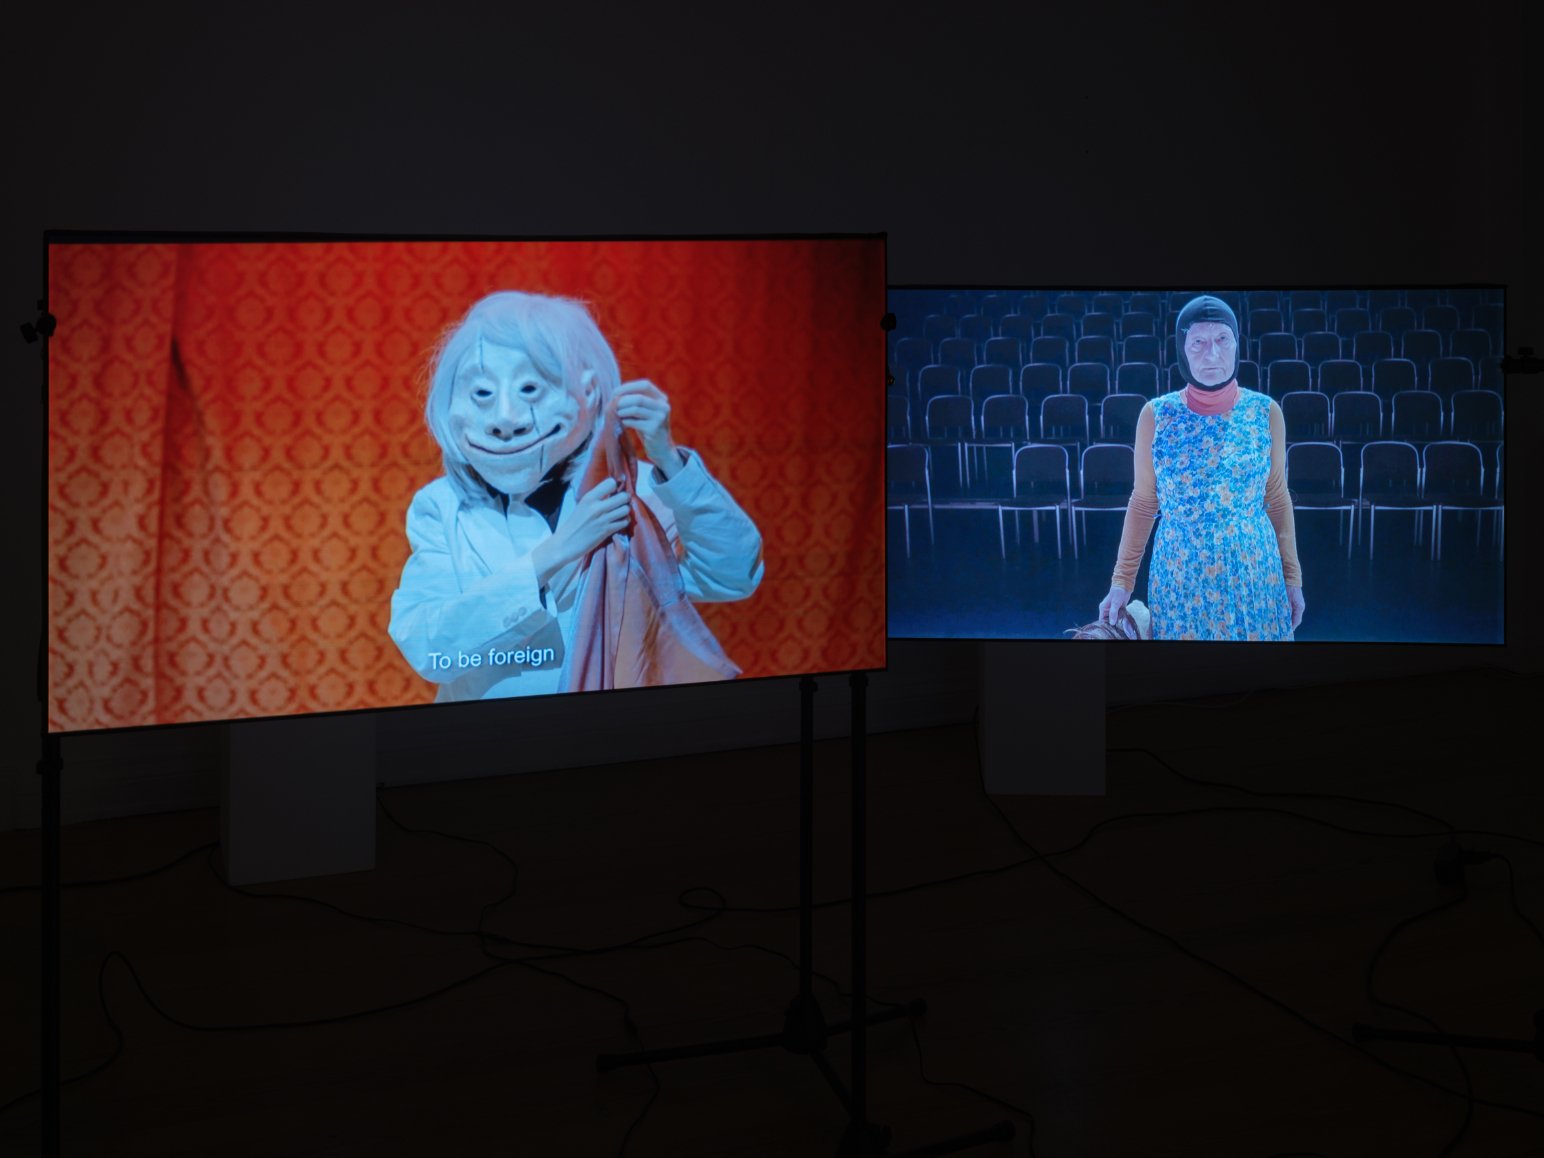  Dudu Quintanilha Installation view,  Prophetic Complaints  (2023) 2-channel video installation, 4K, color, sound, languages Spanish and English 11 min. 44 sec.  Produced in collaboration with Julian Kiesche, Erik D. Clark, Theo Perrot and Blaumeier 